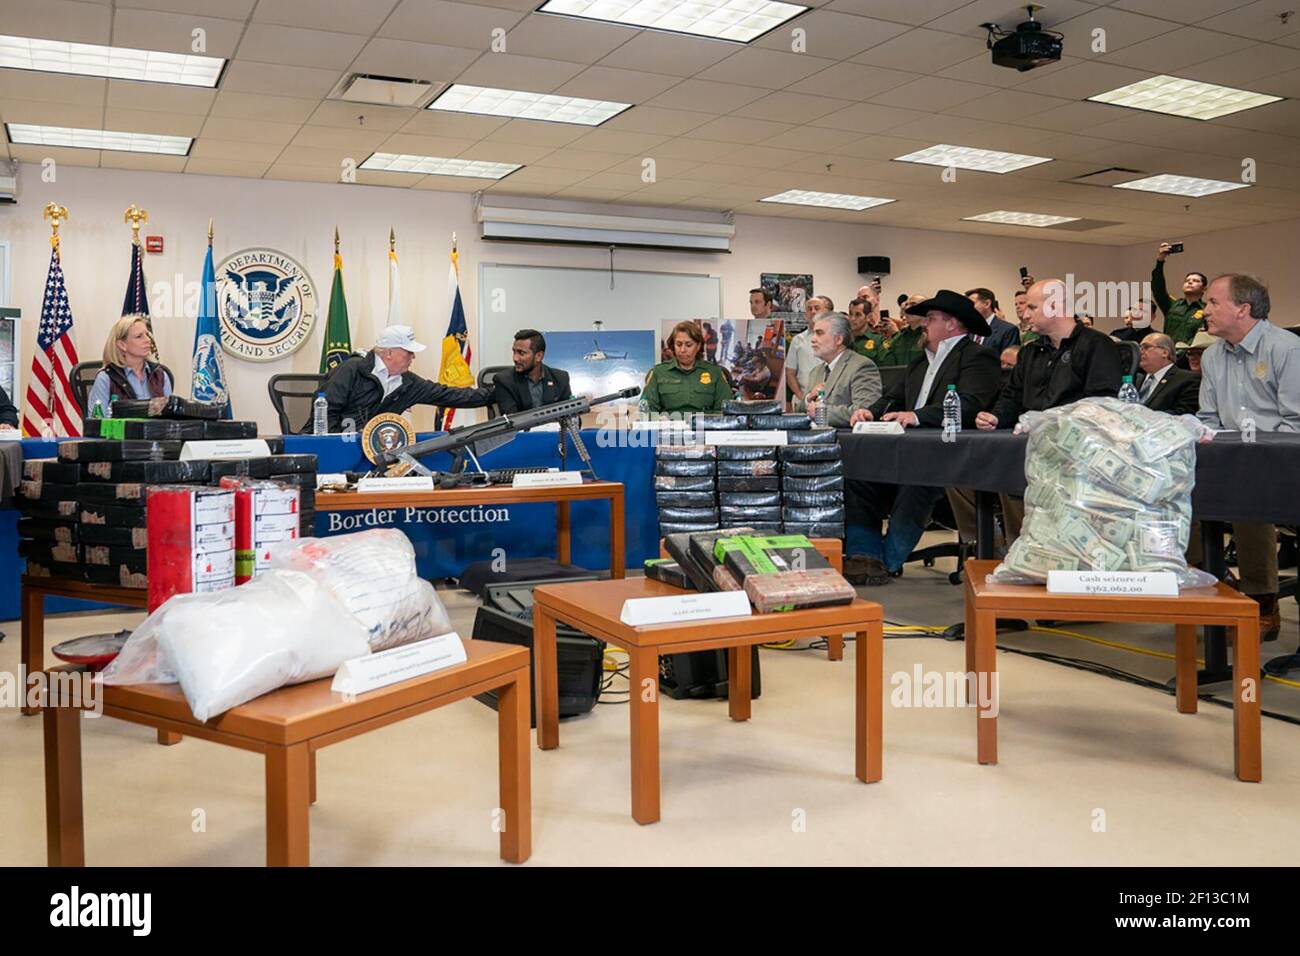 President Donald Trump joined by the Secretary of the Department of Homeland Security Kirstjen Nielsen left participates in a Roundtable on Immigration and Border Security Thursday January 10 2019 at the U.S. Border Patrol McAllen Station in McAllen Texas. Stock Photo